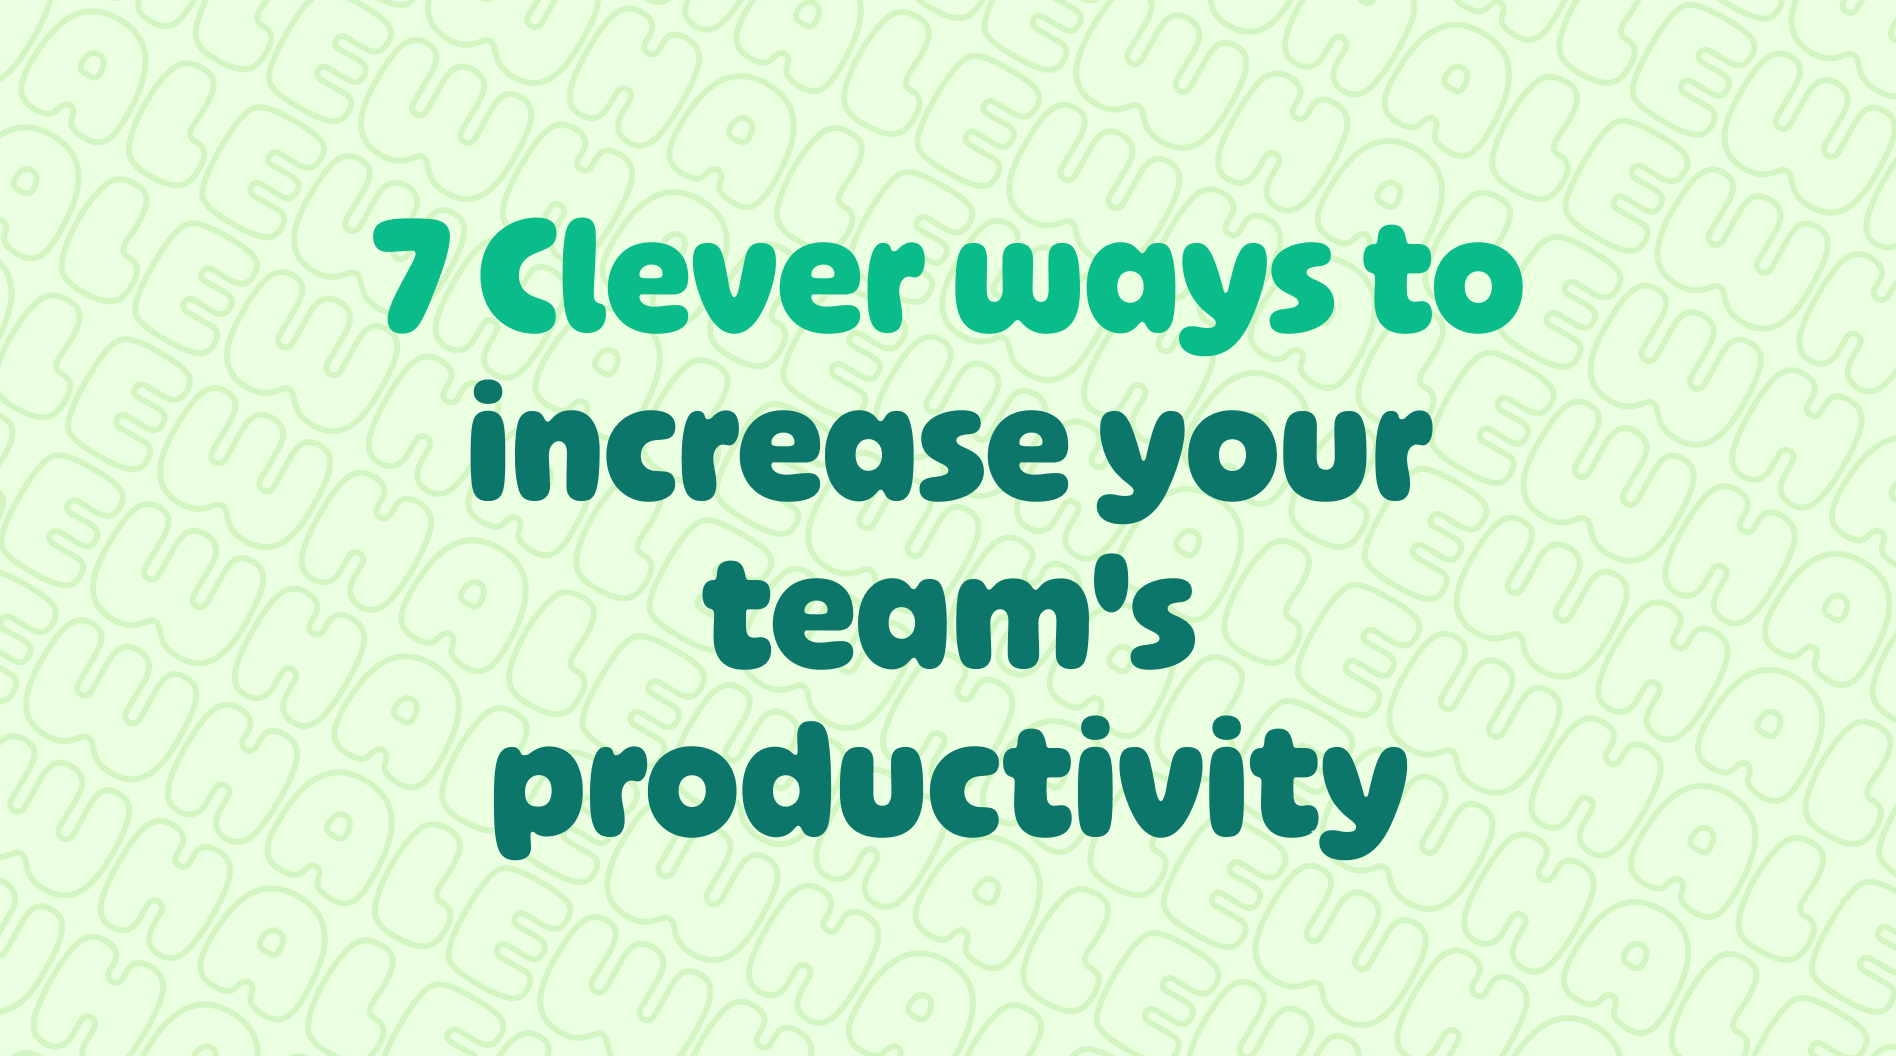 Increase your team's productivity